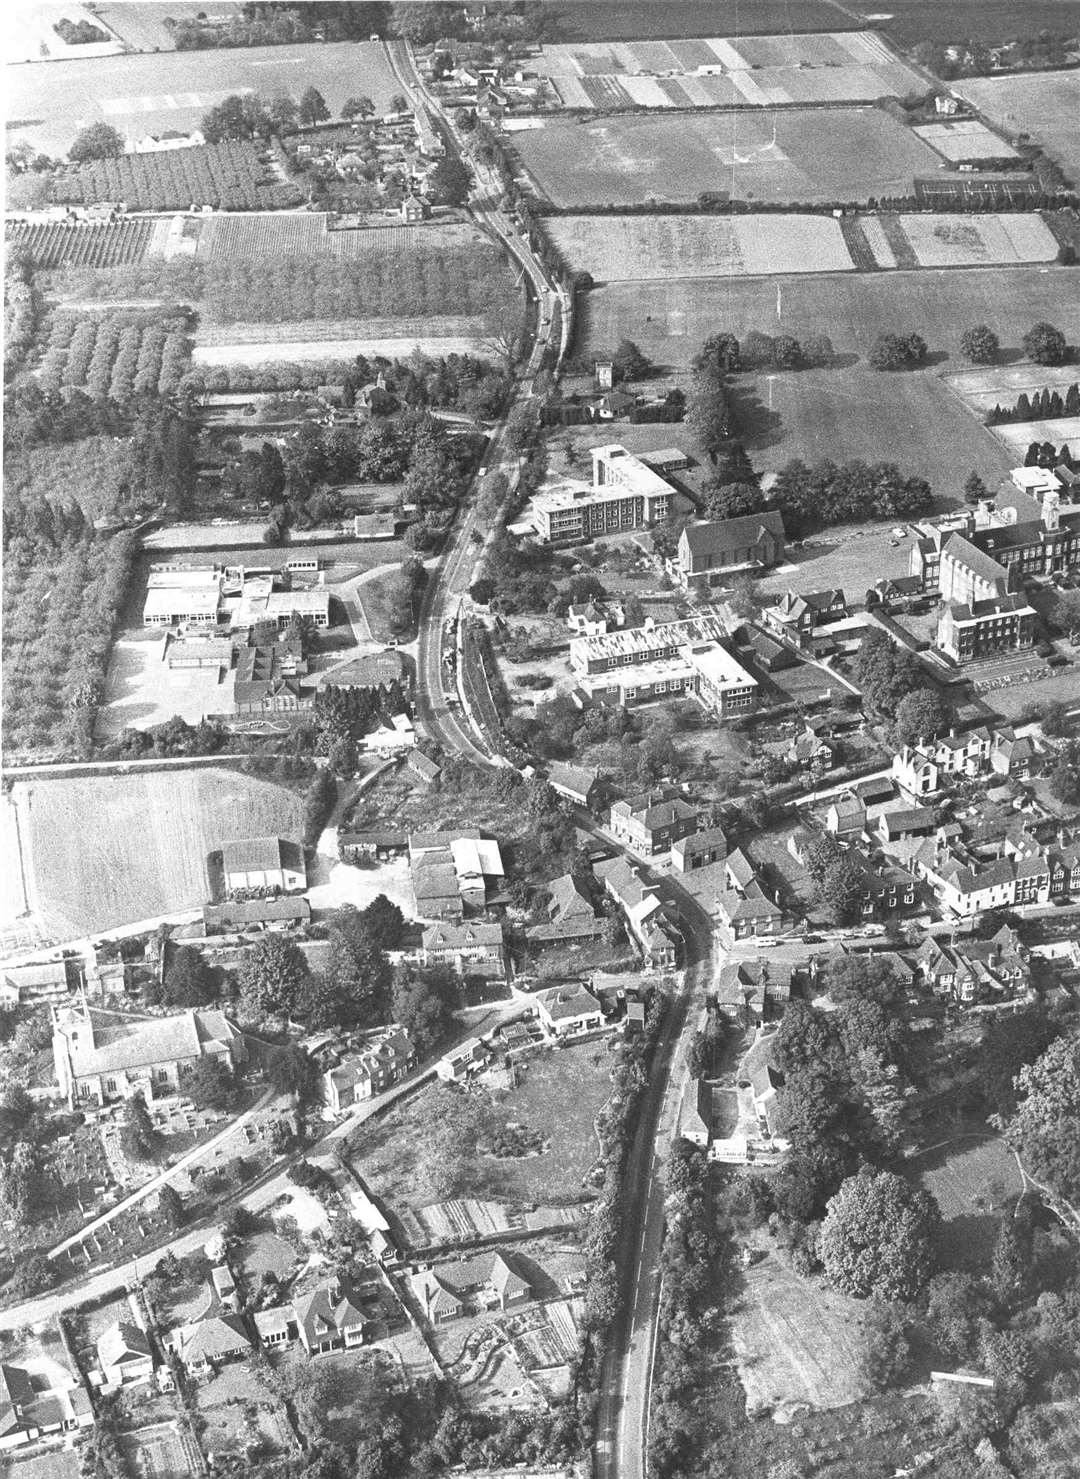 Sutton Valence School dominates this aerial view of the village. The Church of St Mary, rebuilt in 1882, can be seen in the left foreground